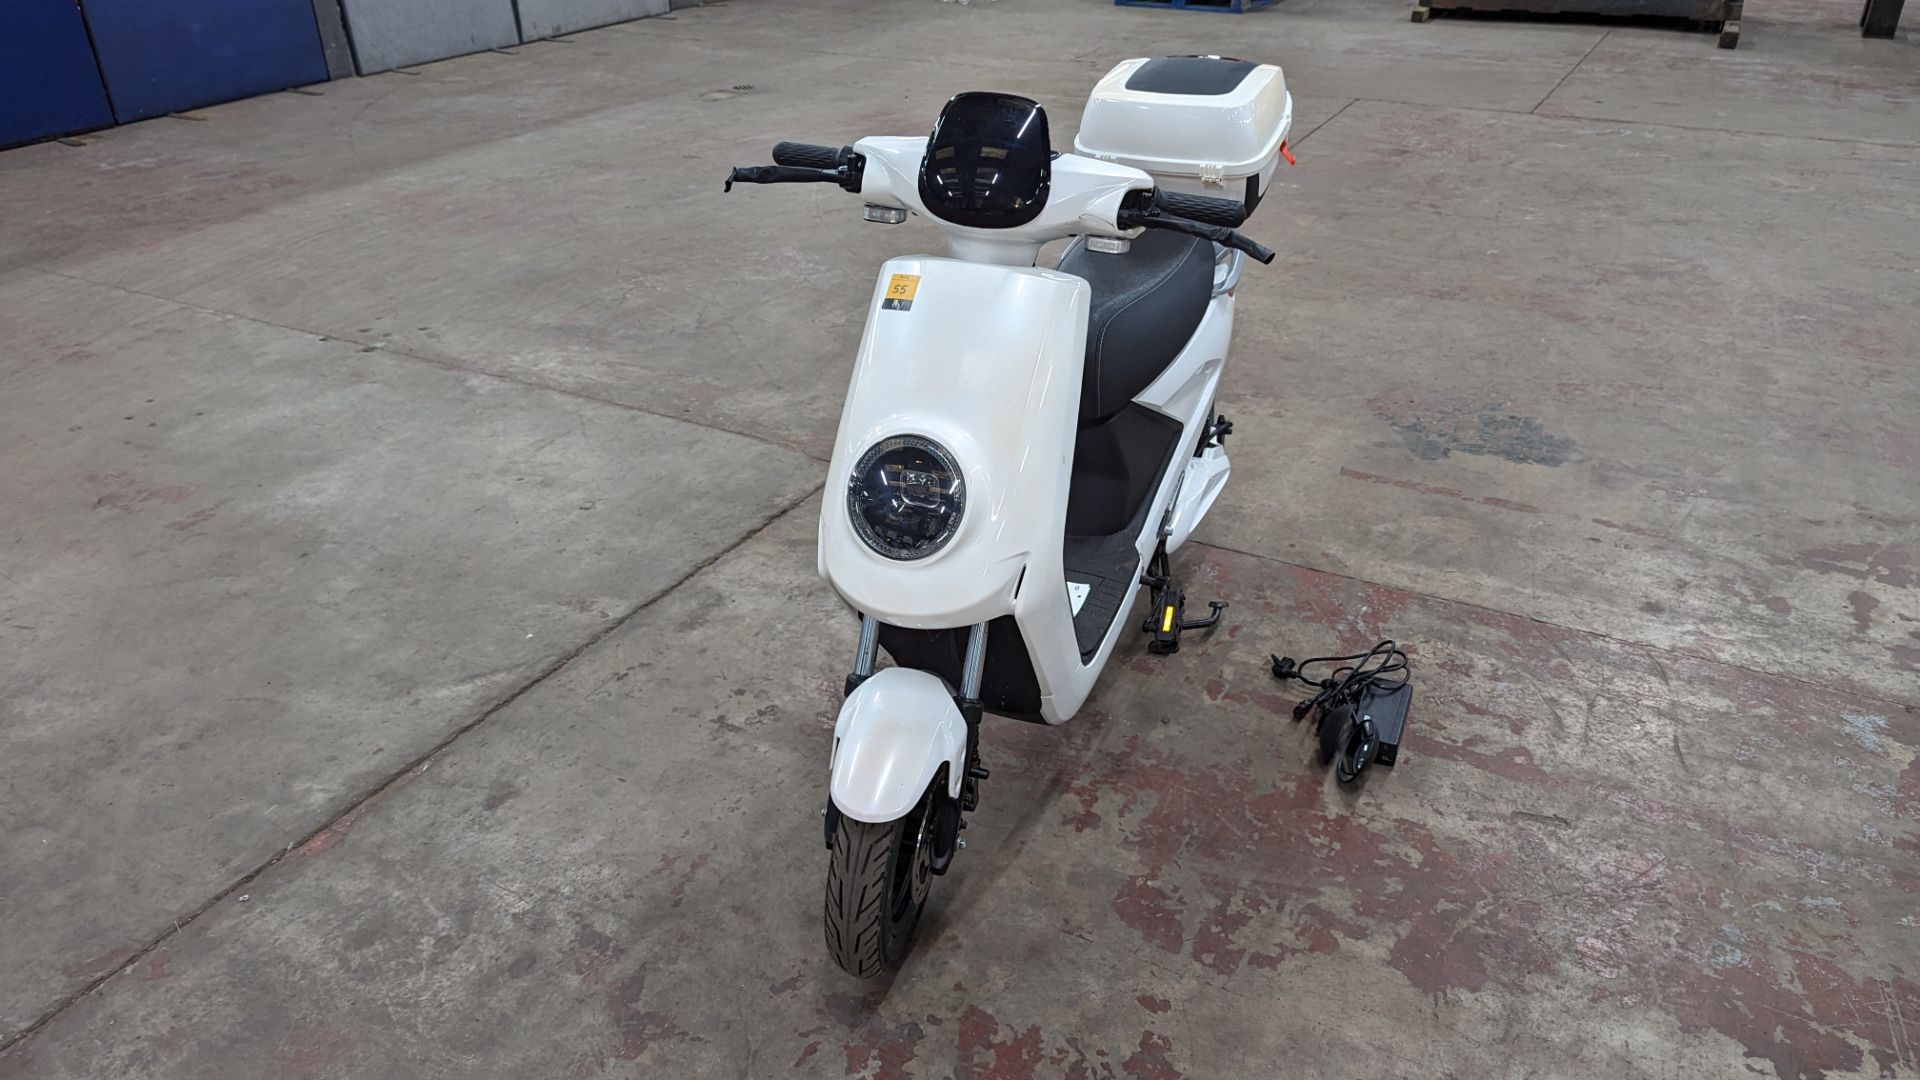 Model 18 Electric Bike: Used/low miles, white body with black detailing. This bike is not brand new, - Image 8 of 13